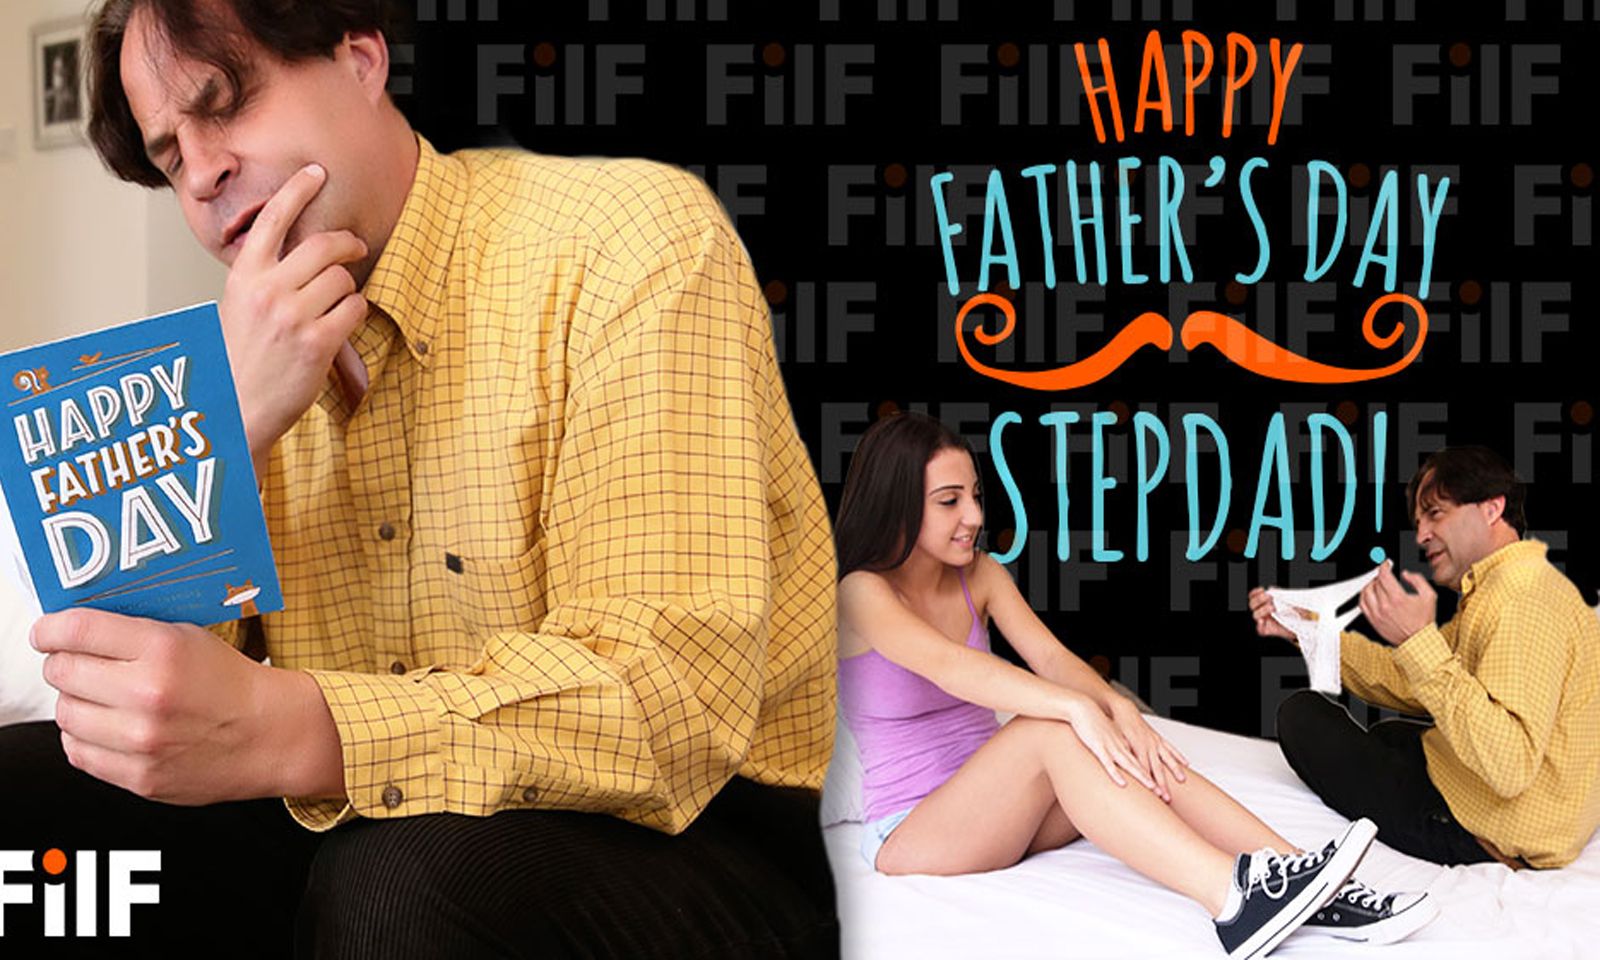 FILF.com Gives Dads an Unforgettable Father’s Gift